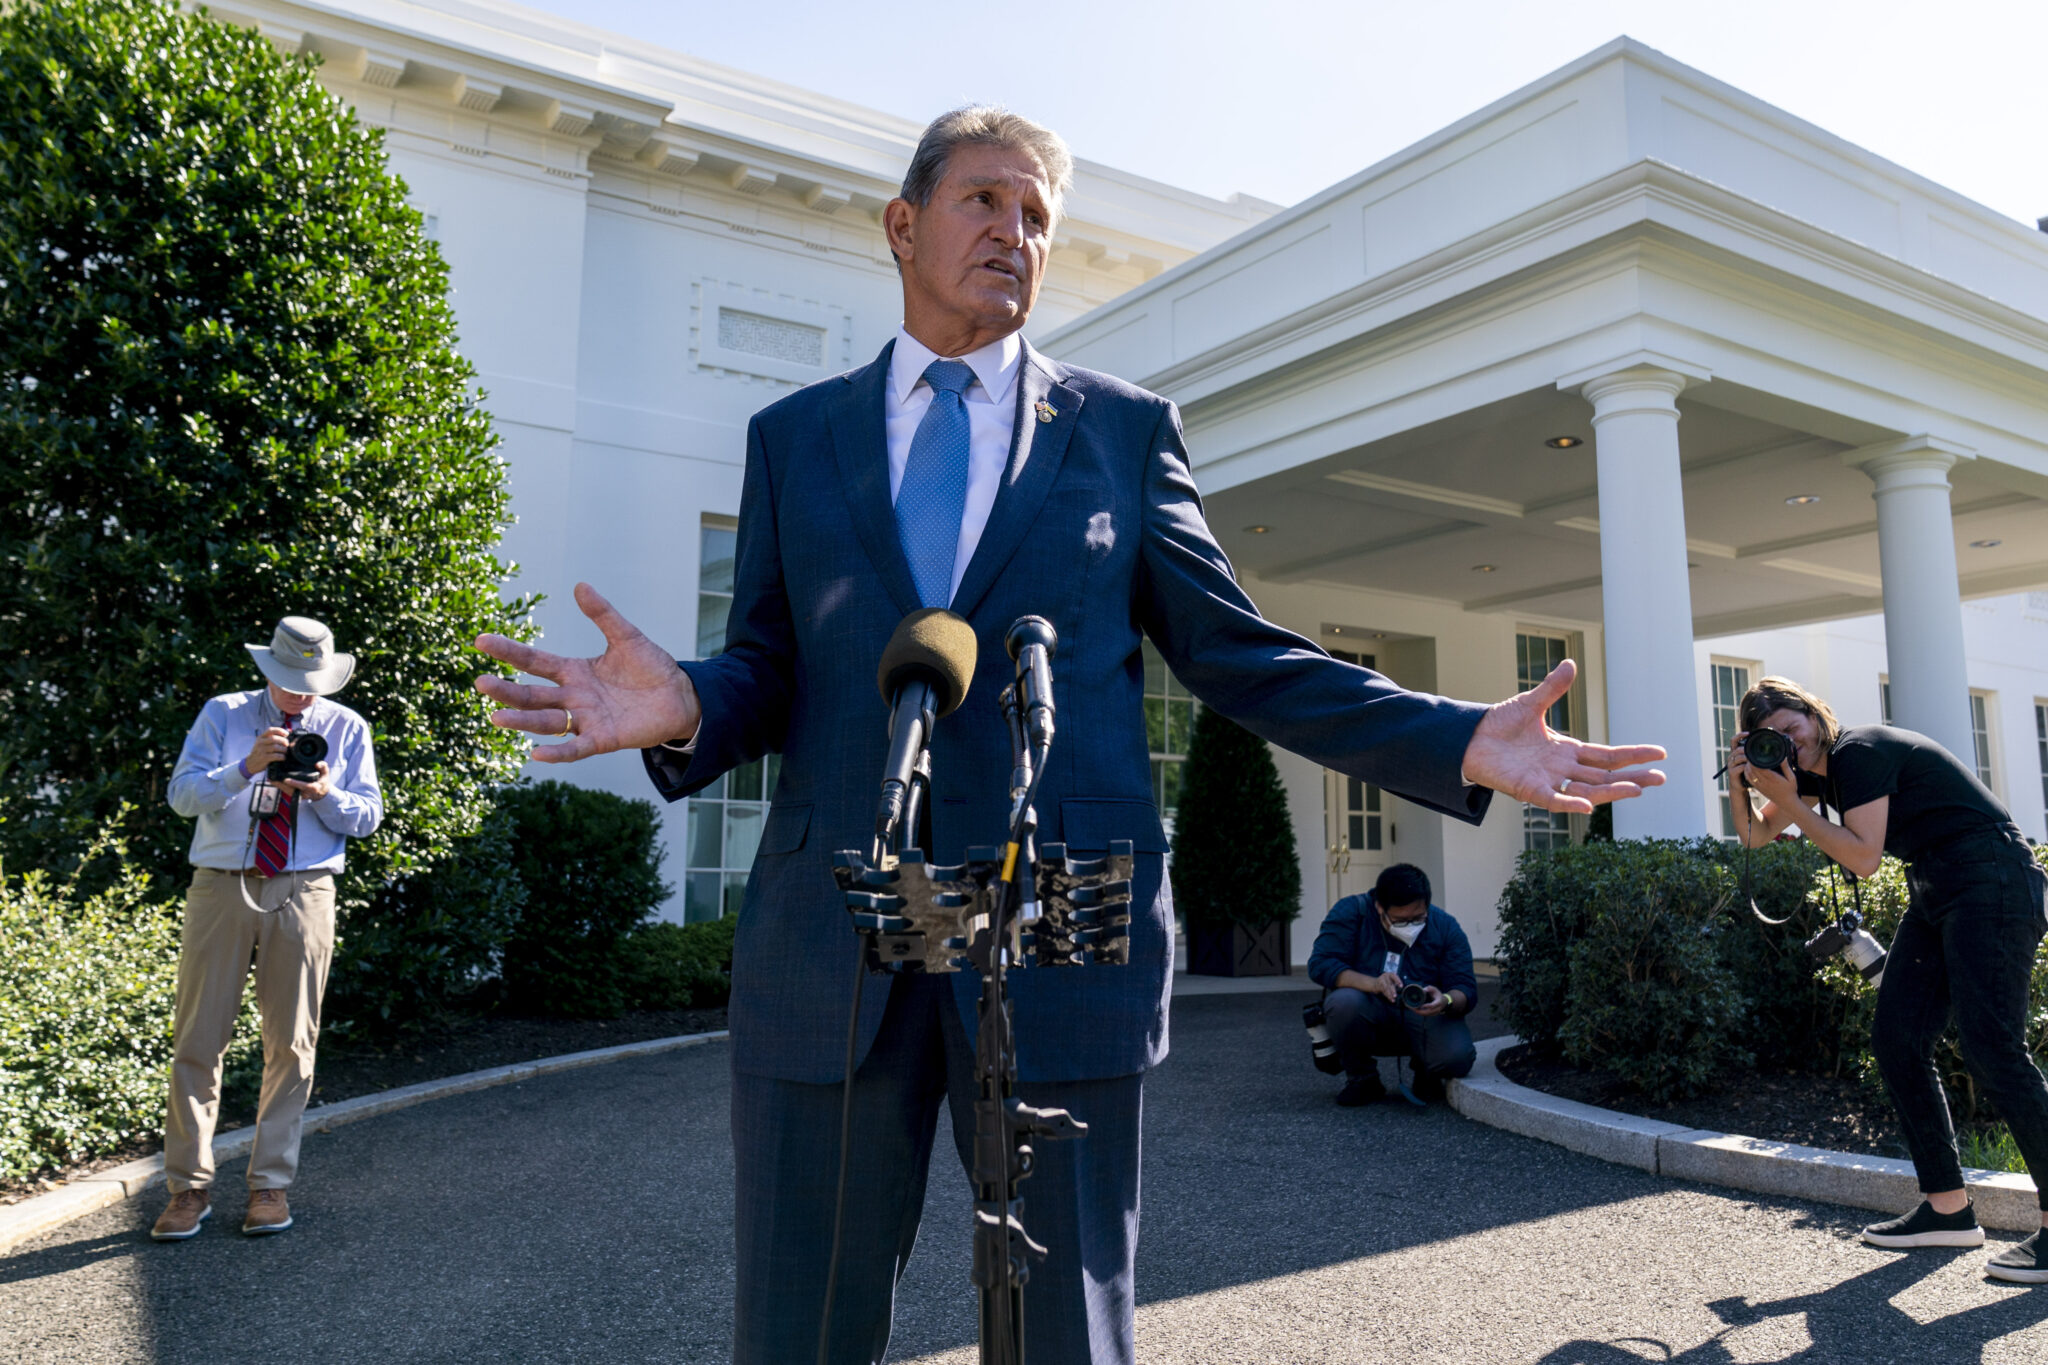 Sen. Joe Manchin, D-W.Va., speaks to reporters outside the West Wing of the White House in Washington, Tuesday, Aug. 16, 2022, after President Joe Biden signed the Democrats' landmark climate change and health care bill. (AP Photo/Andrew Harnik)